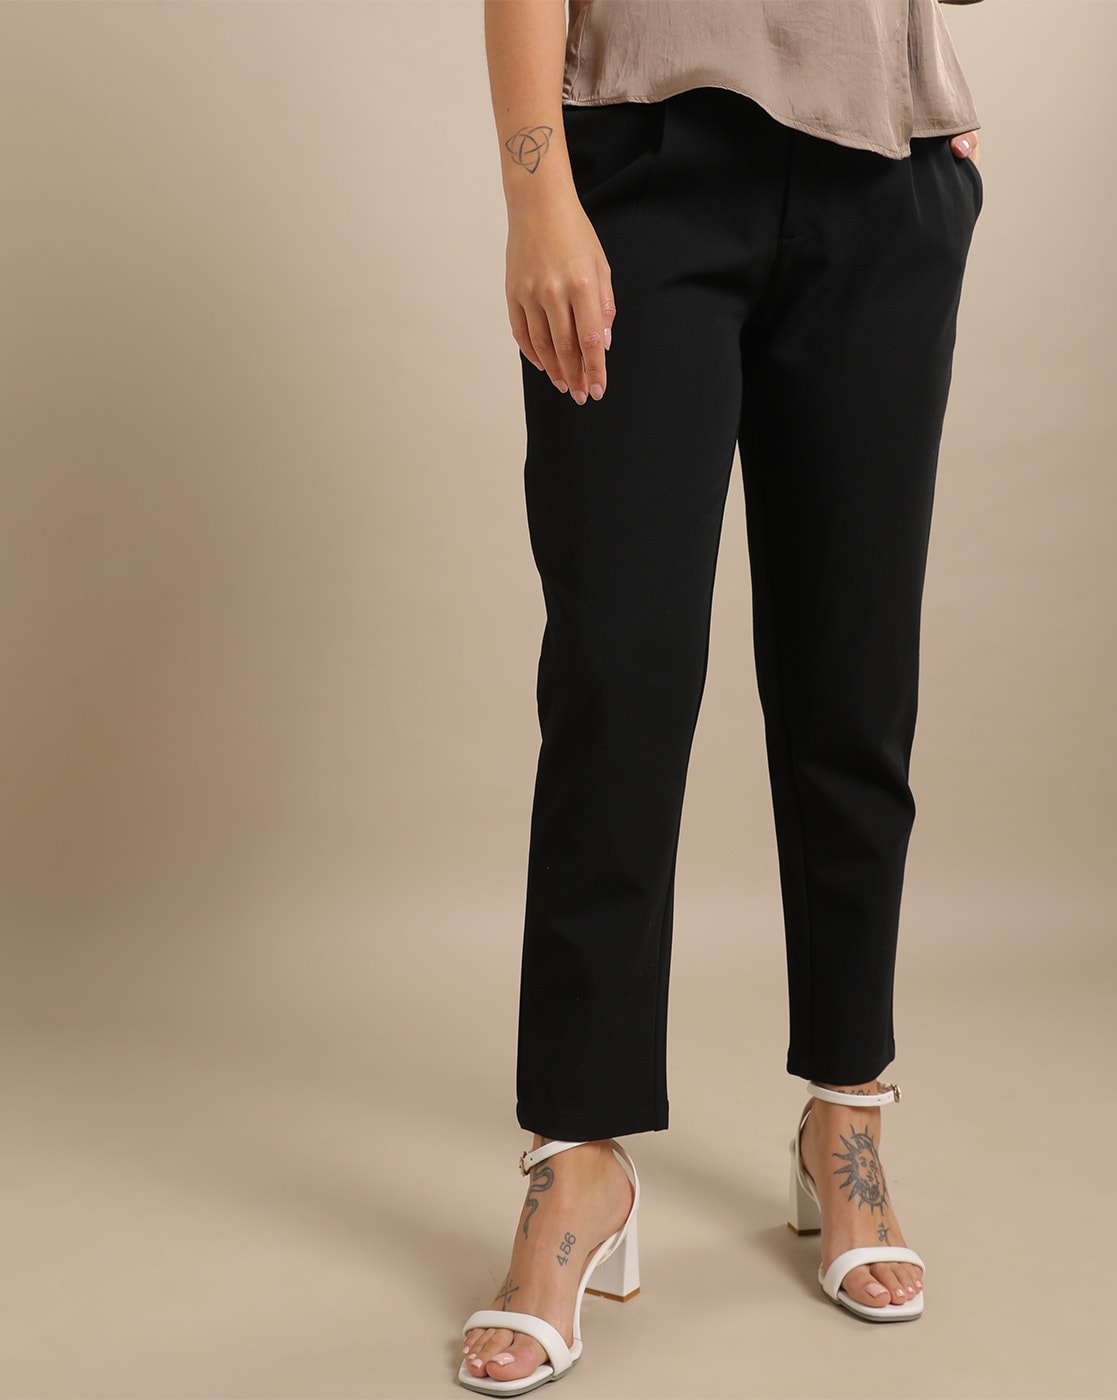 Flounce London cigarette trousers with paperbag waist in black | ASOS